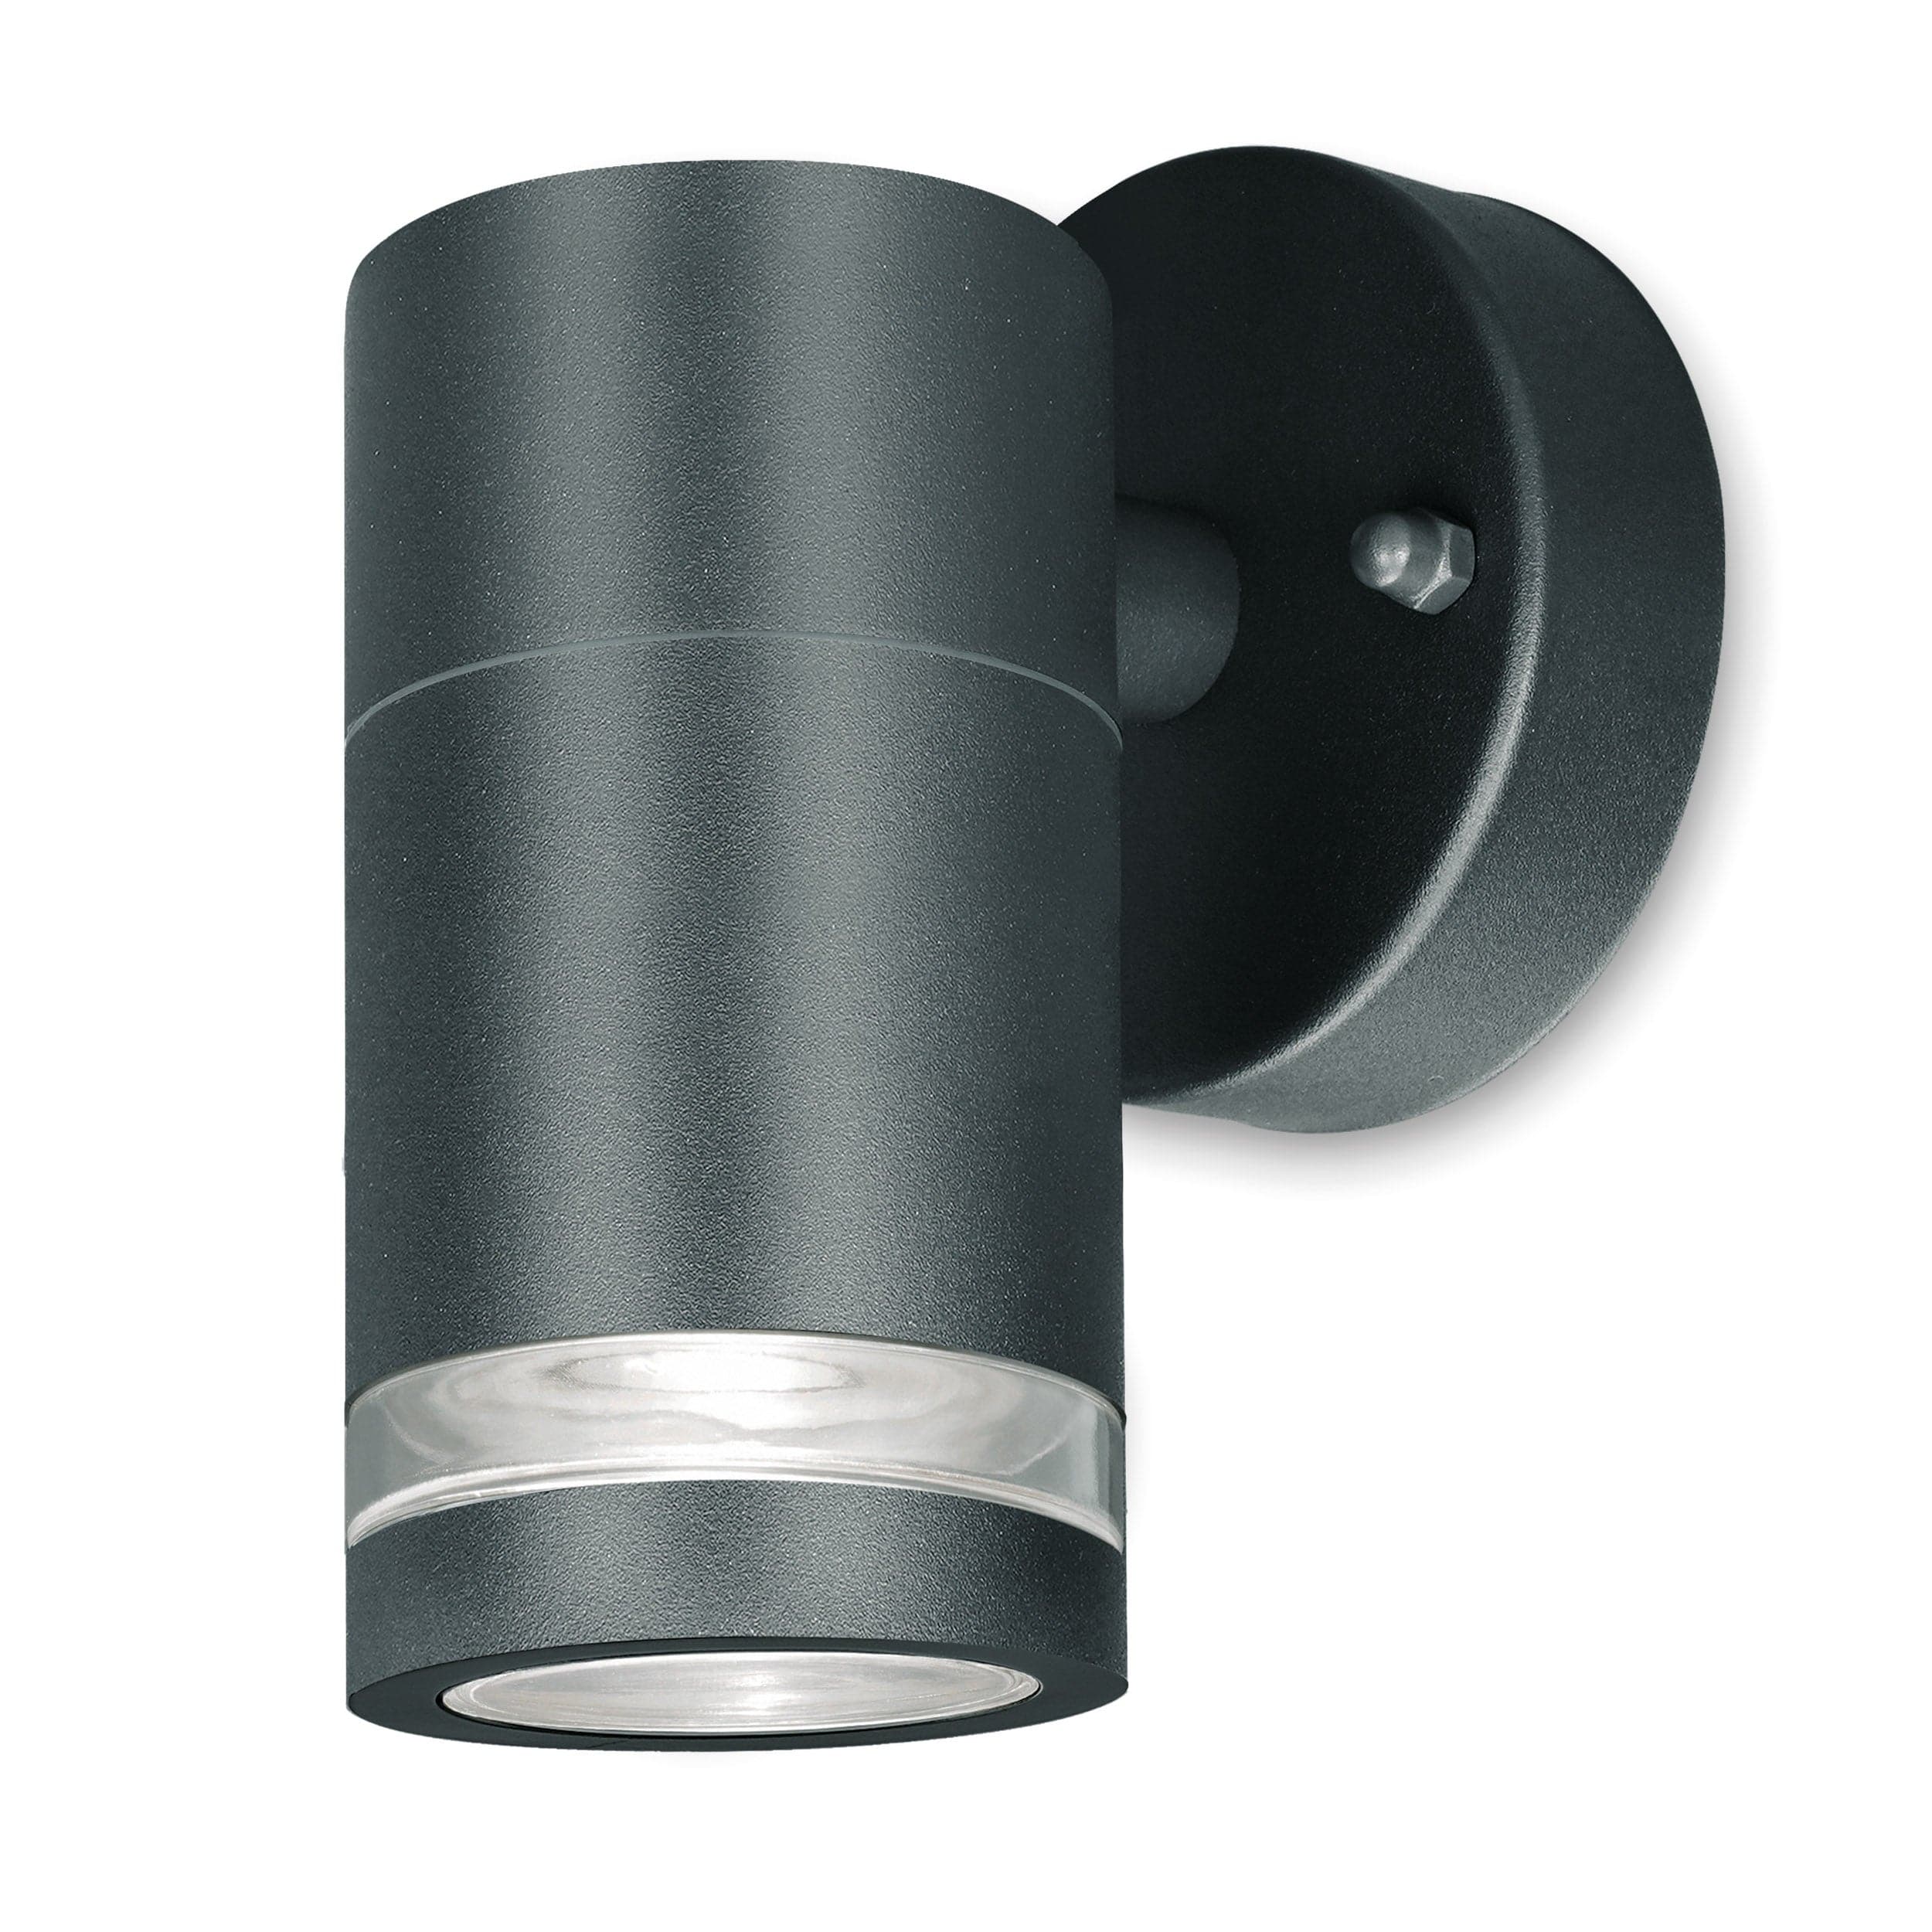 4lite Marinus GU10 Single Direction Outdoor Wall Light without PIR - Anthracite (Single)